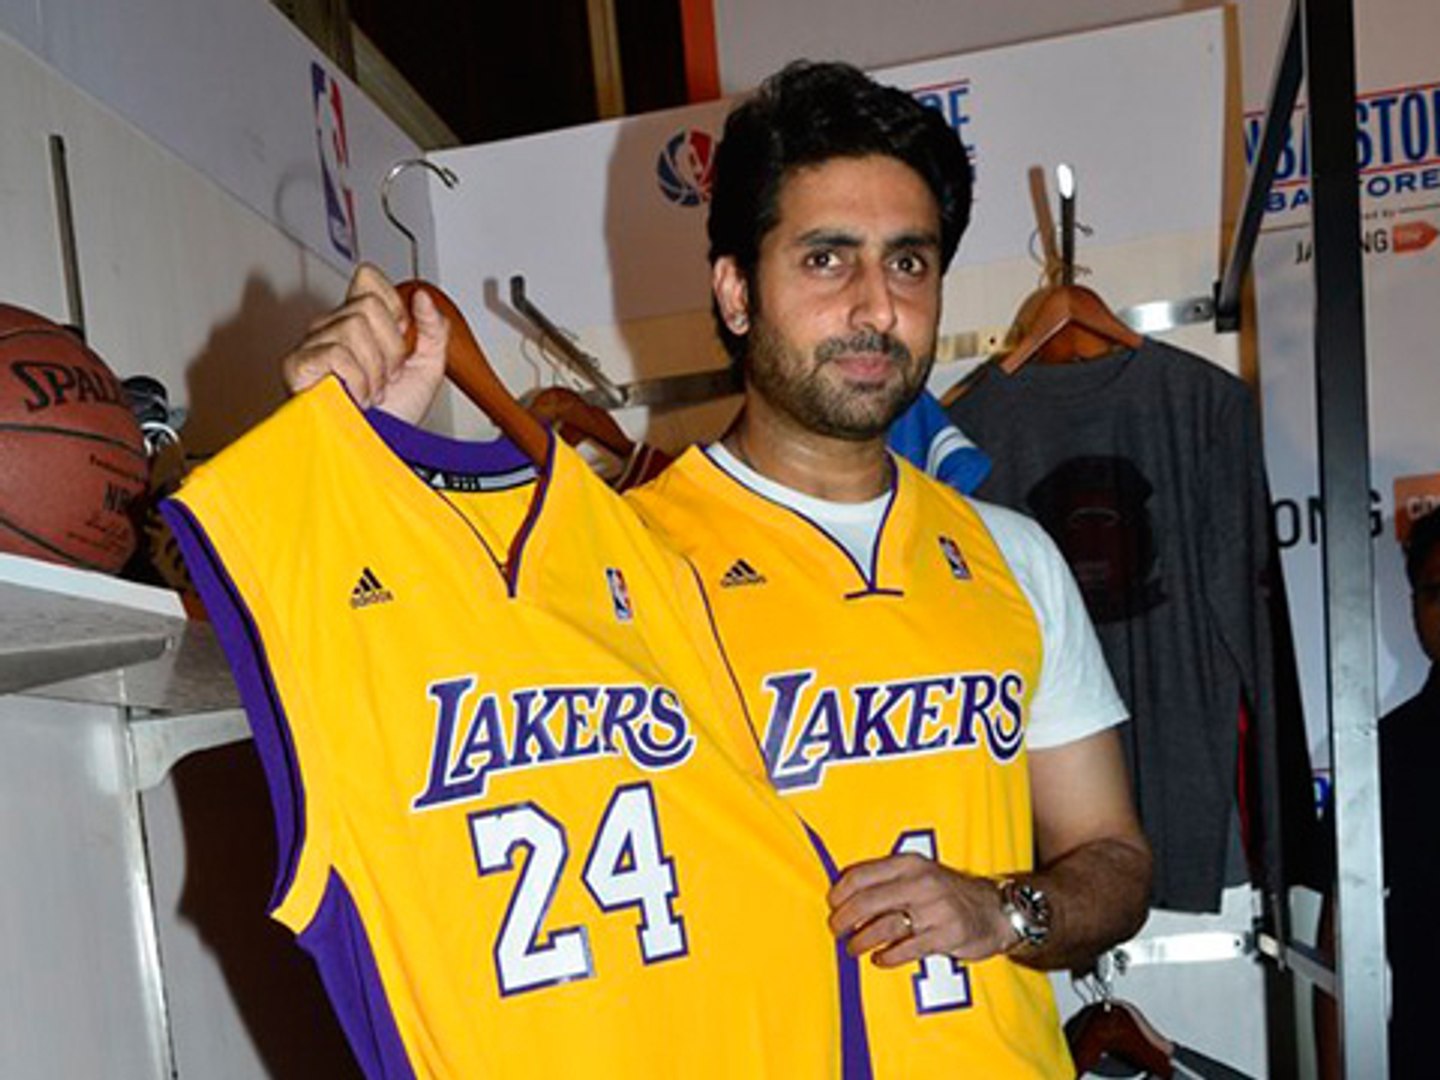 Bollywood Star Abhishek Bachchan Launches NBA's First Online Store in India  – The Hollywood Reporter